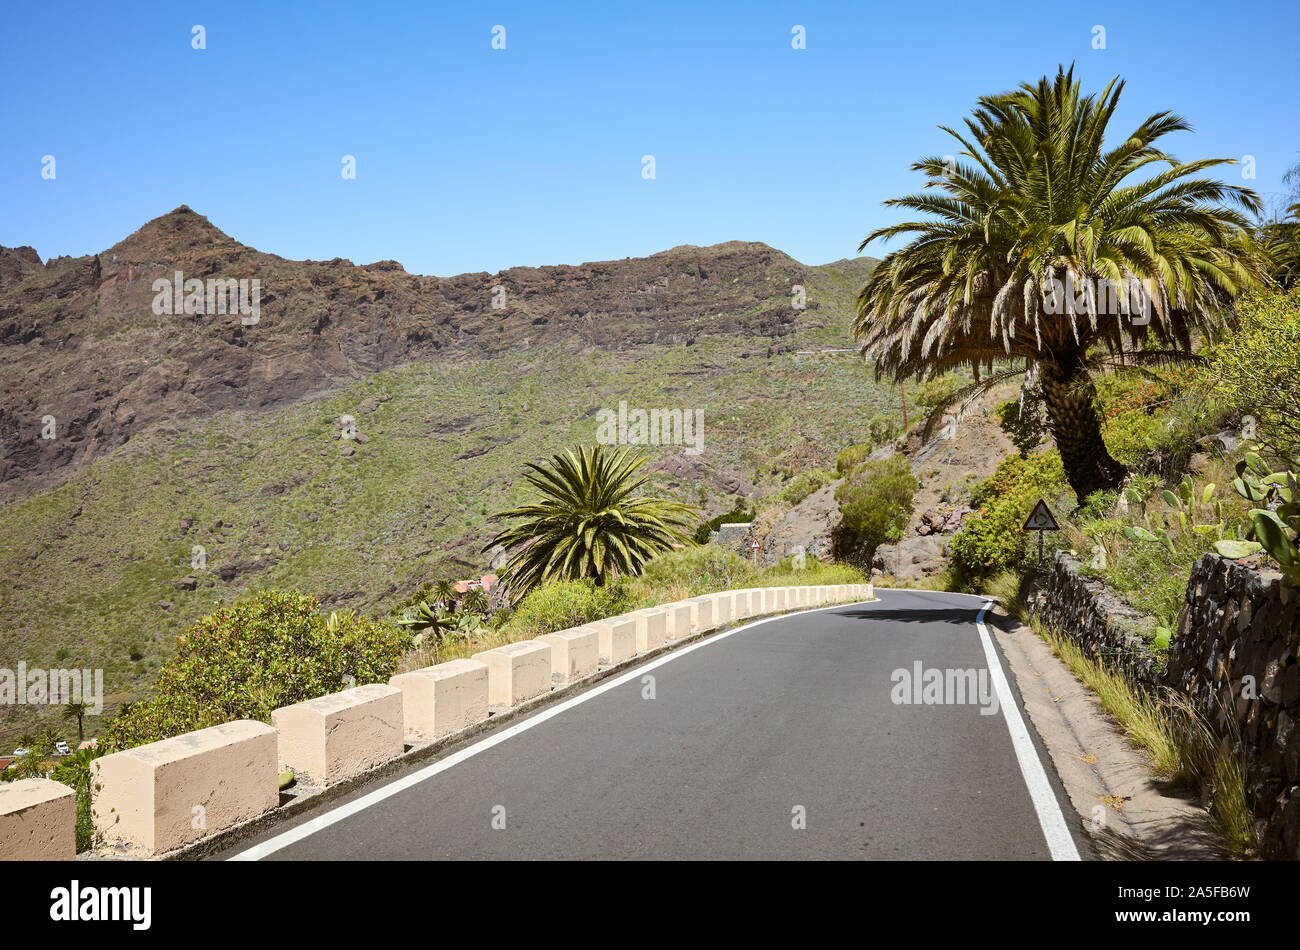 Mountain road with palm trees aside, Tenerife, Spain. Stock Photo